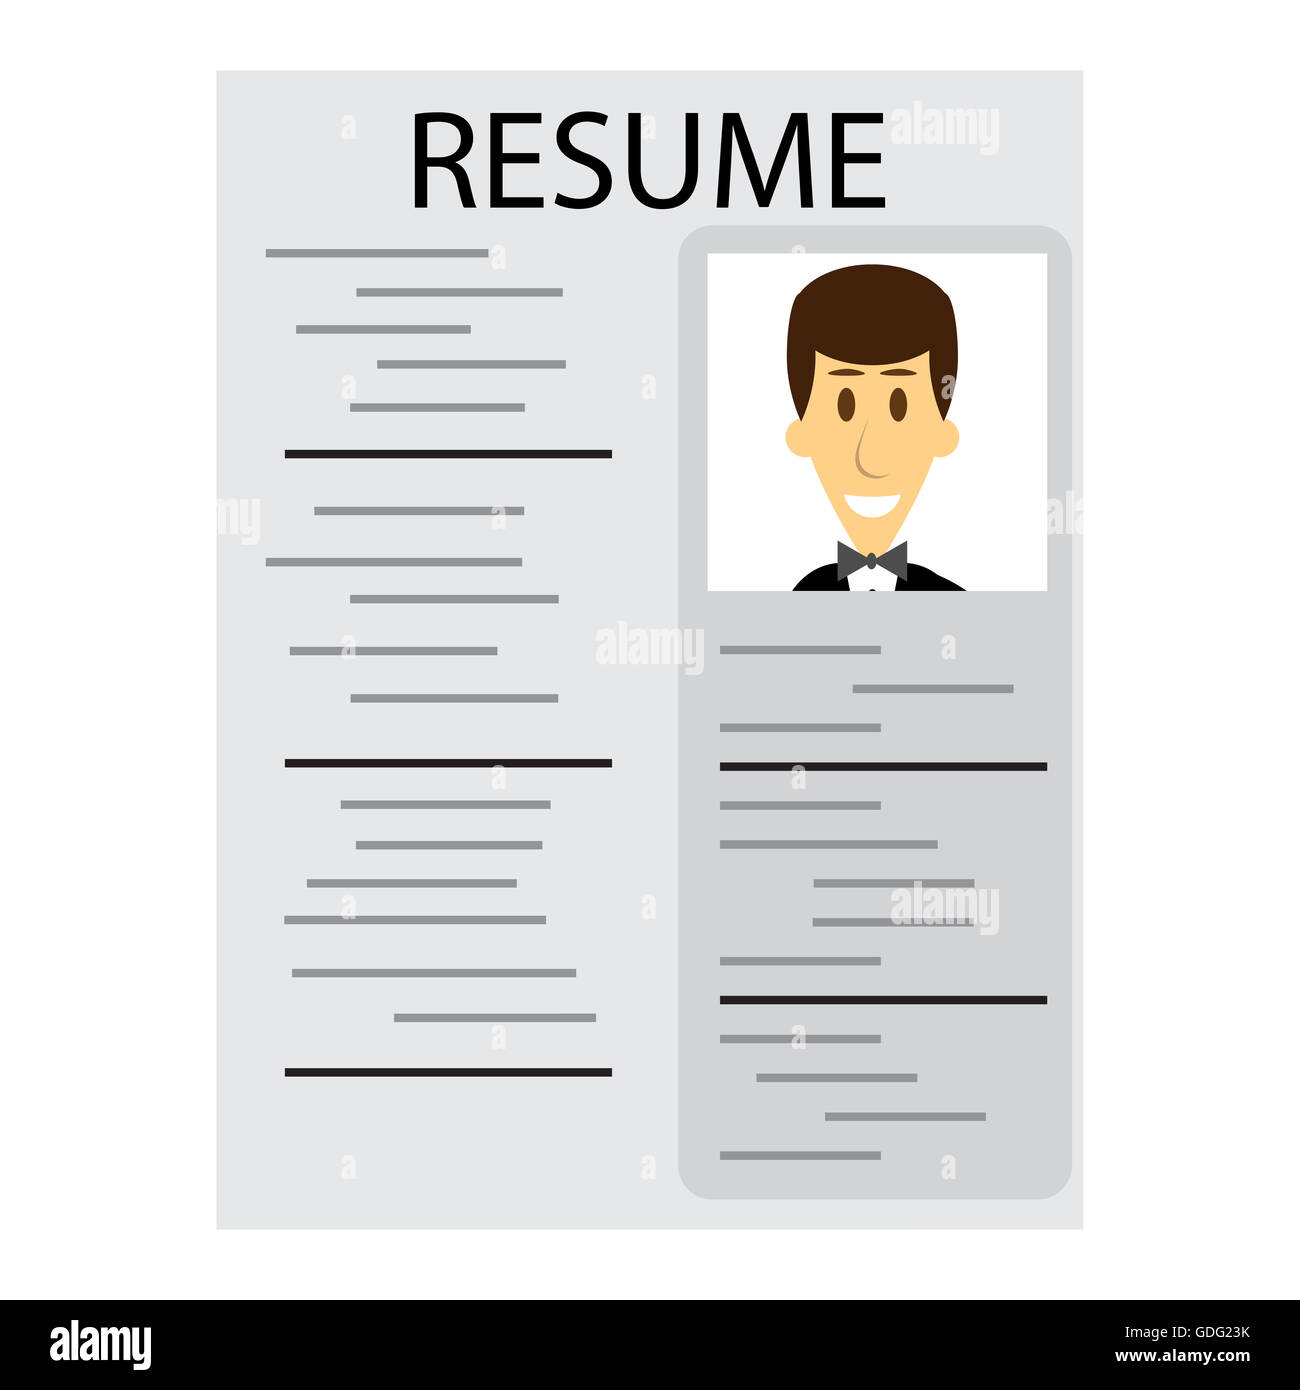 5 Habits Of Highly Effective resume